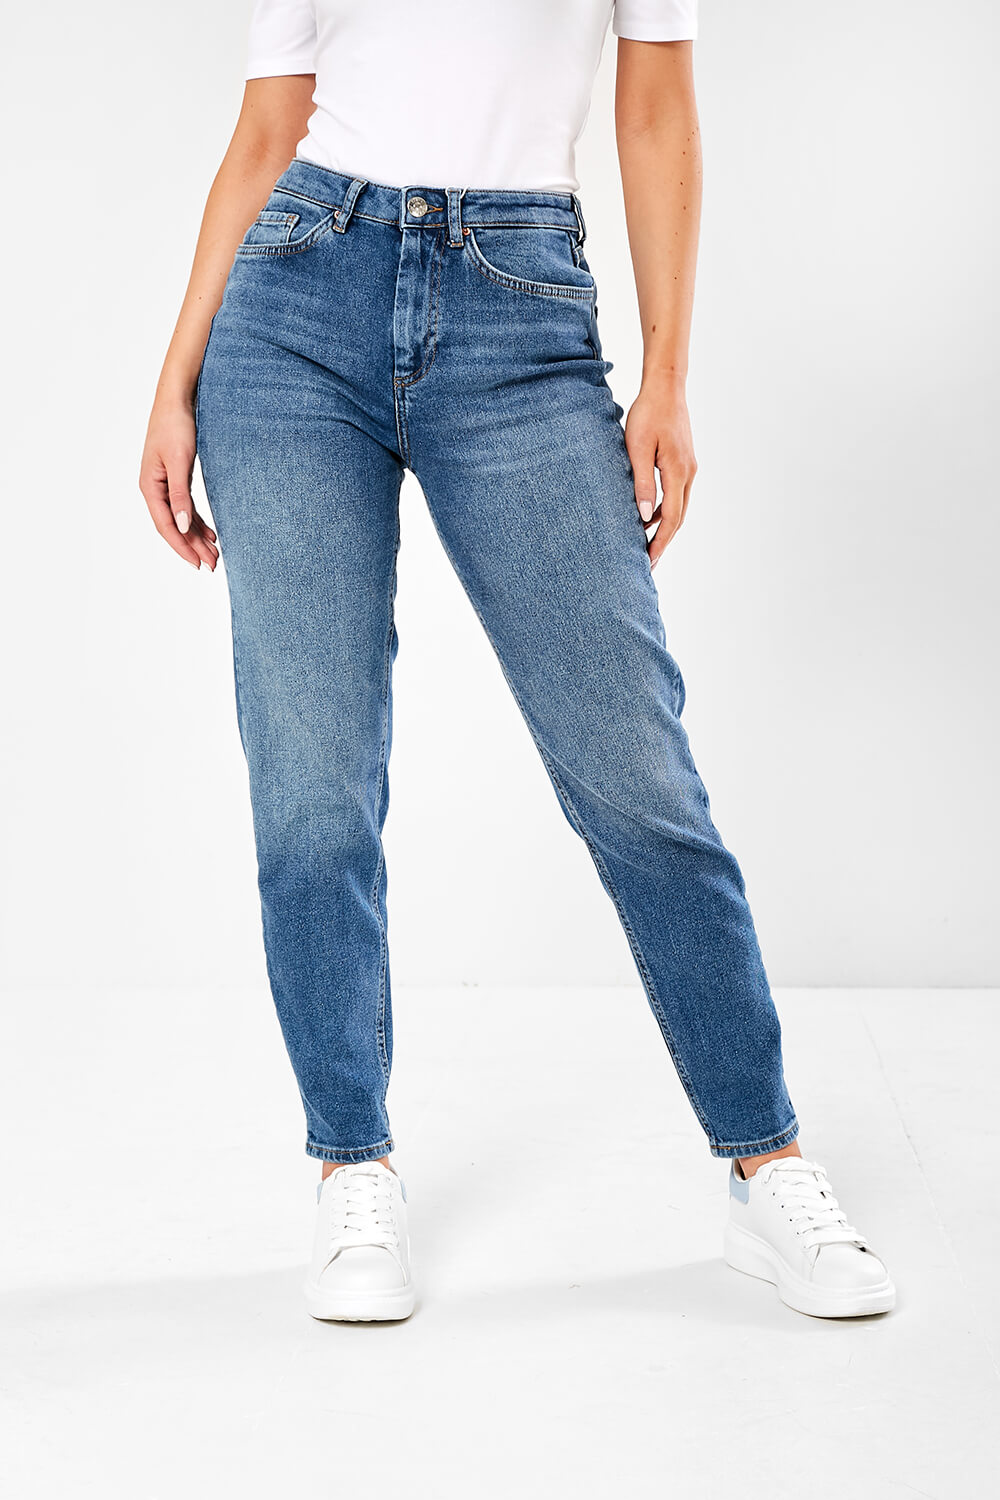 Only Veneda High Rise Mom Jeans in Dark Blue | iCLOTHING - iCLOTHING